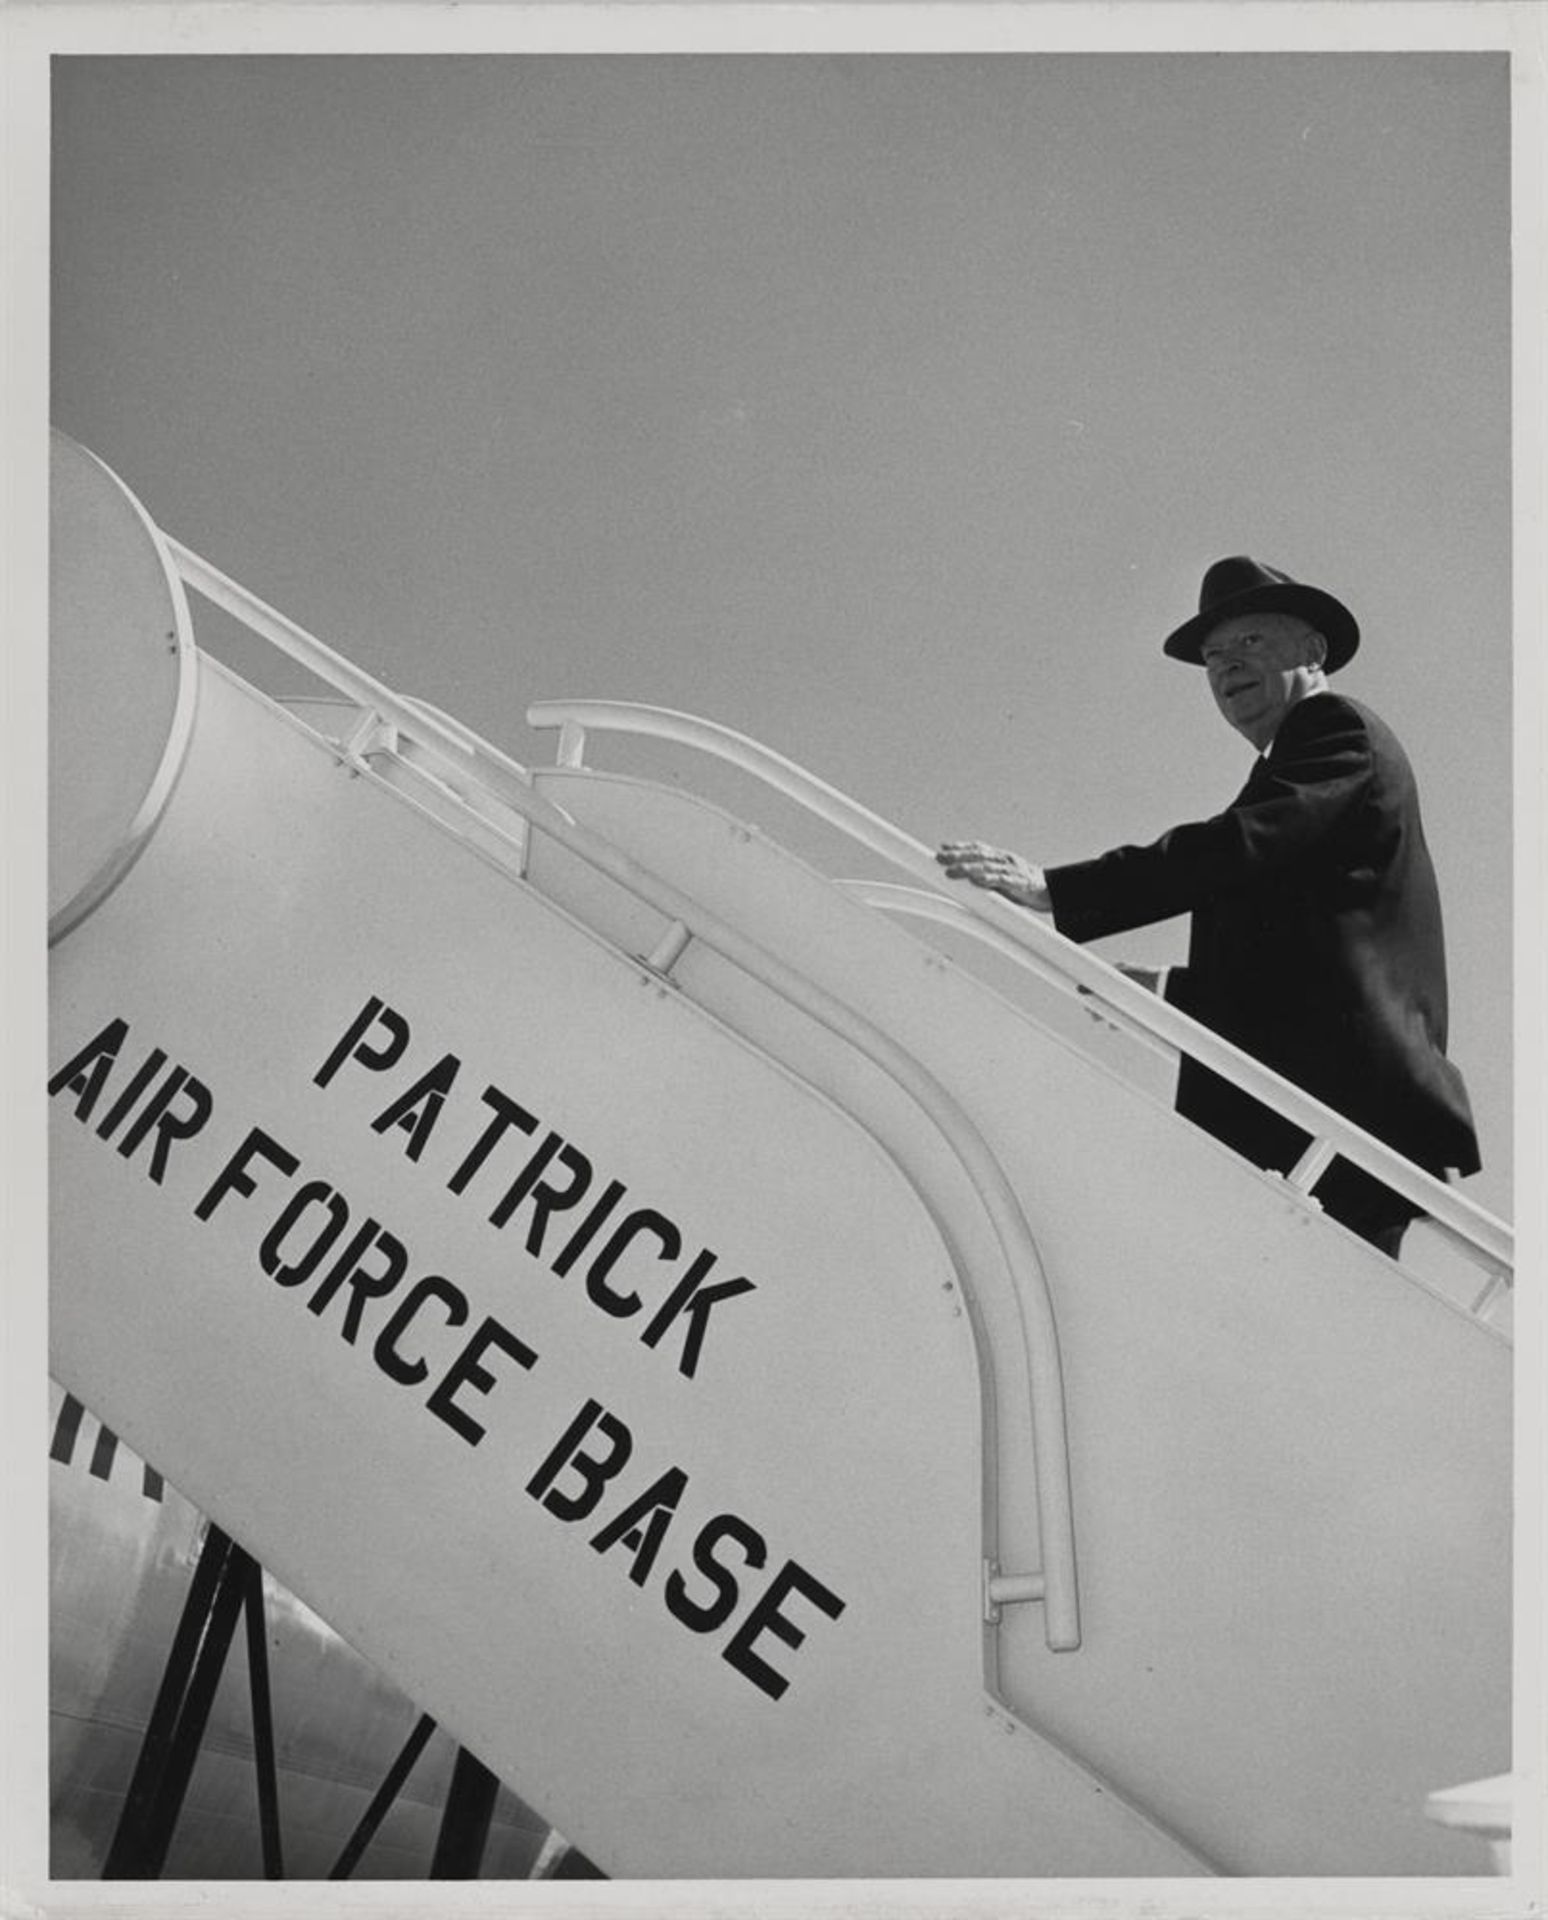 NASA’s founding US President, Dwight Eisenhower, visits Cape Canaveral (2 views), 10 February 1960 - Image 4 of 5